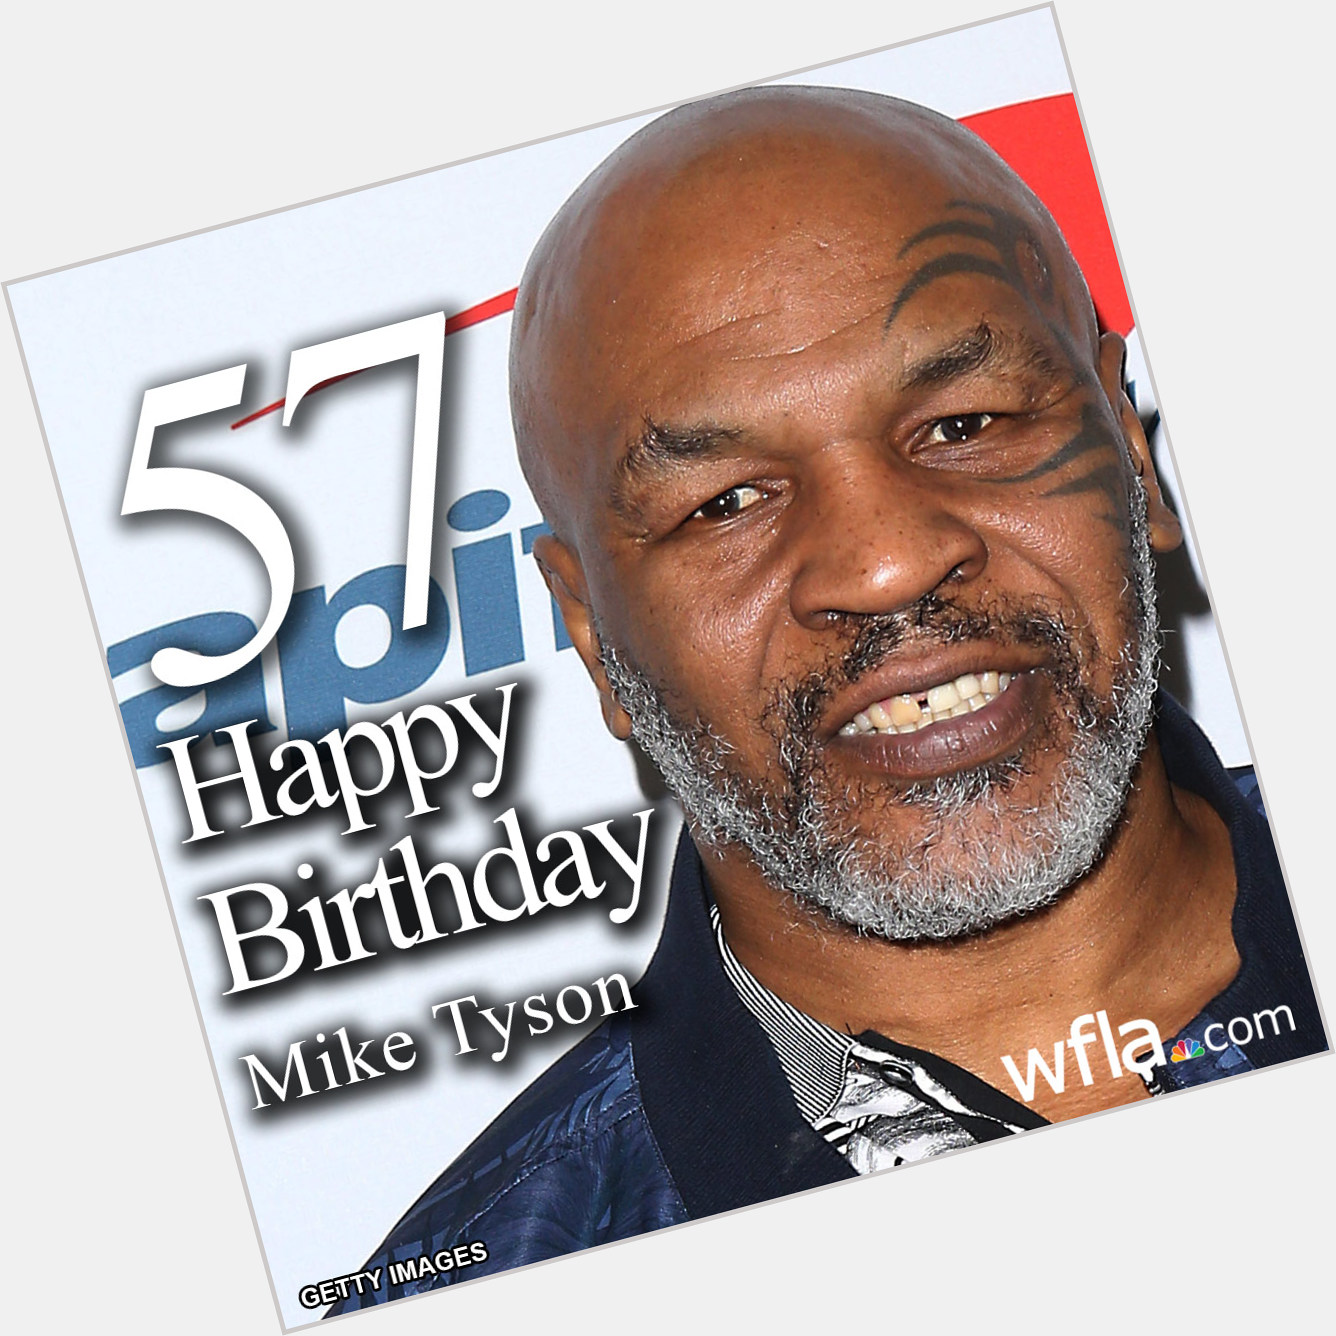 HAPPY BIRTHDAY!! Boxer Mike Tyson is 57 today!  